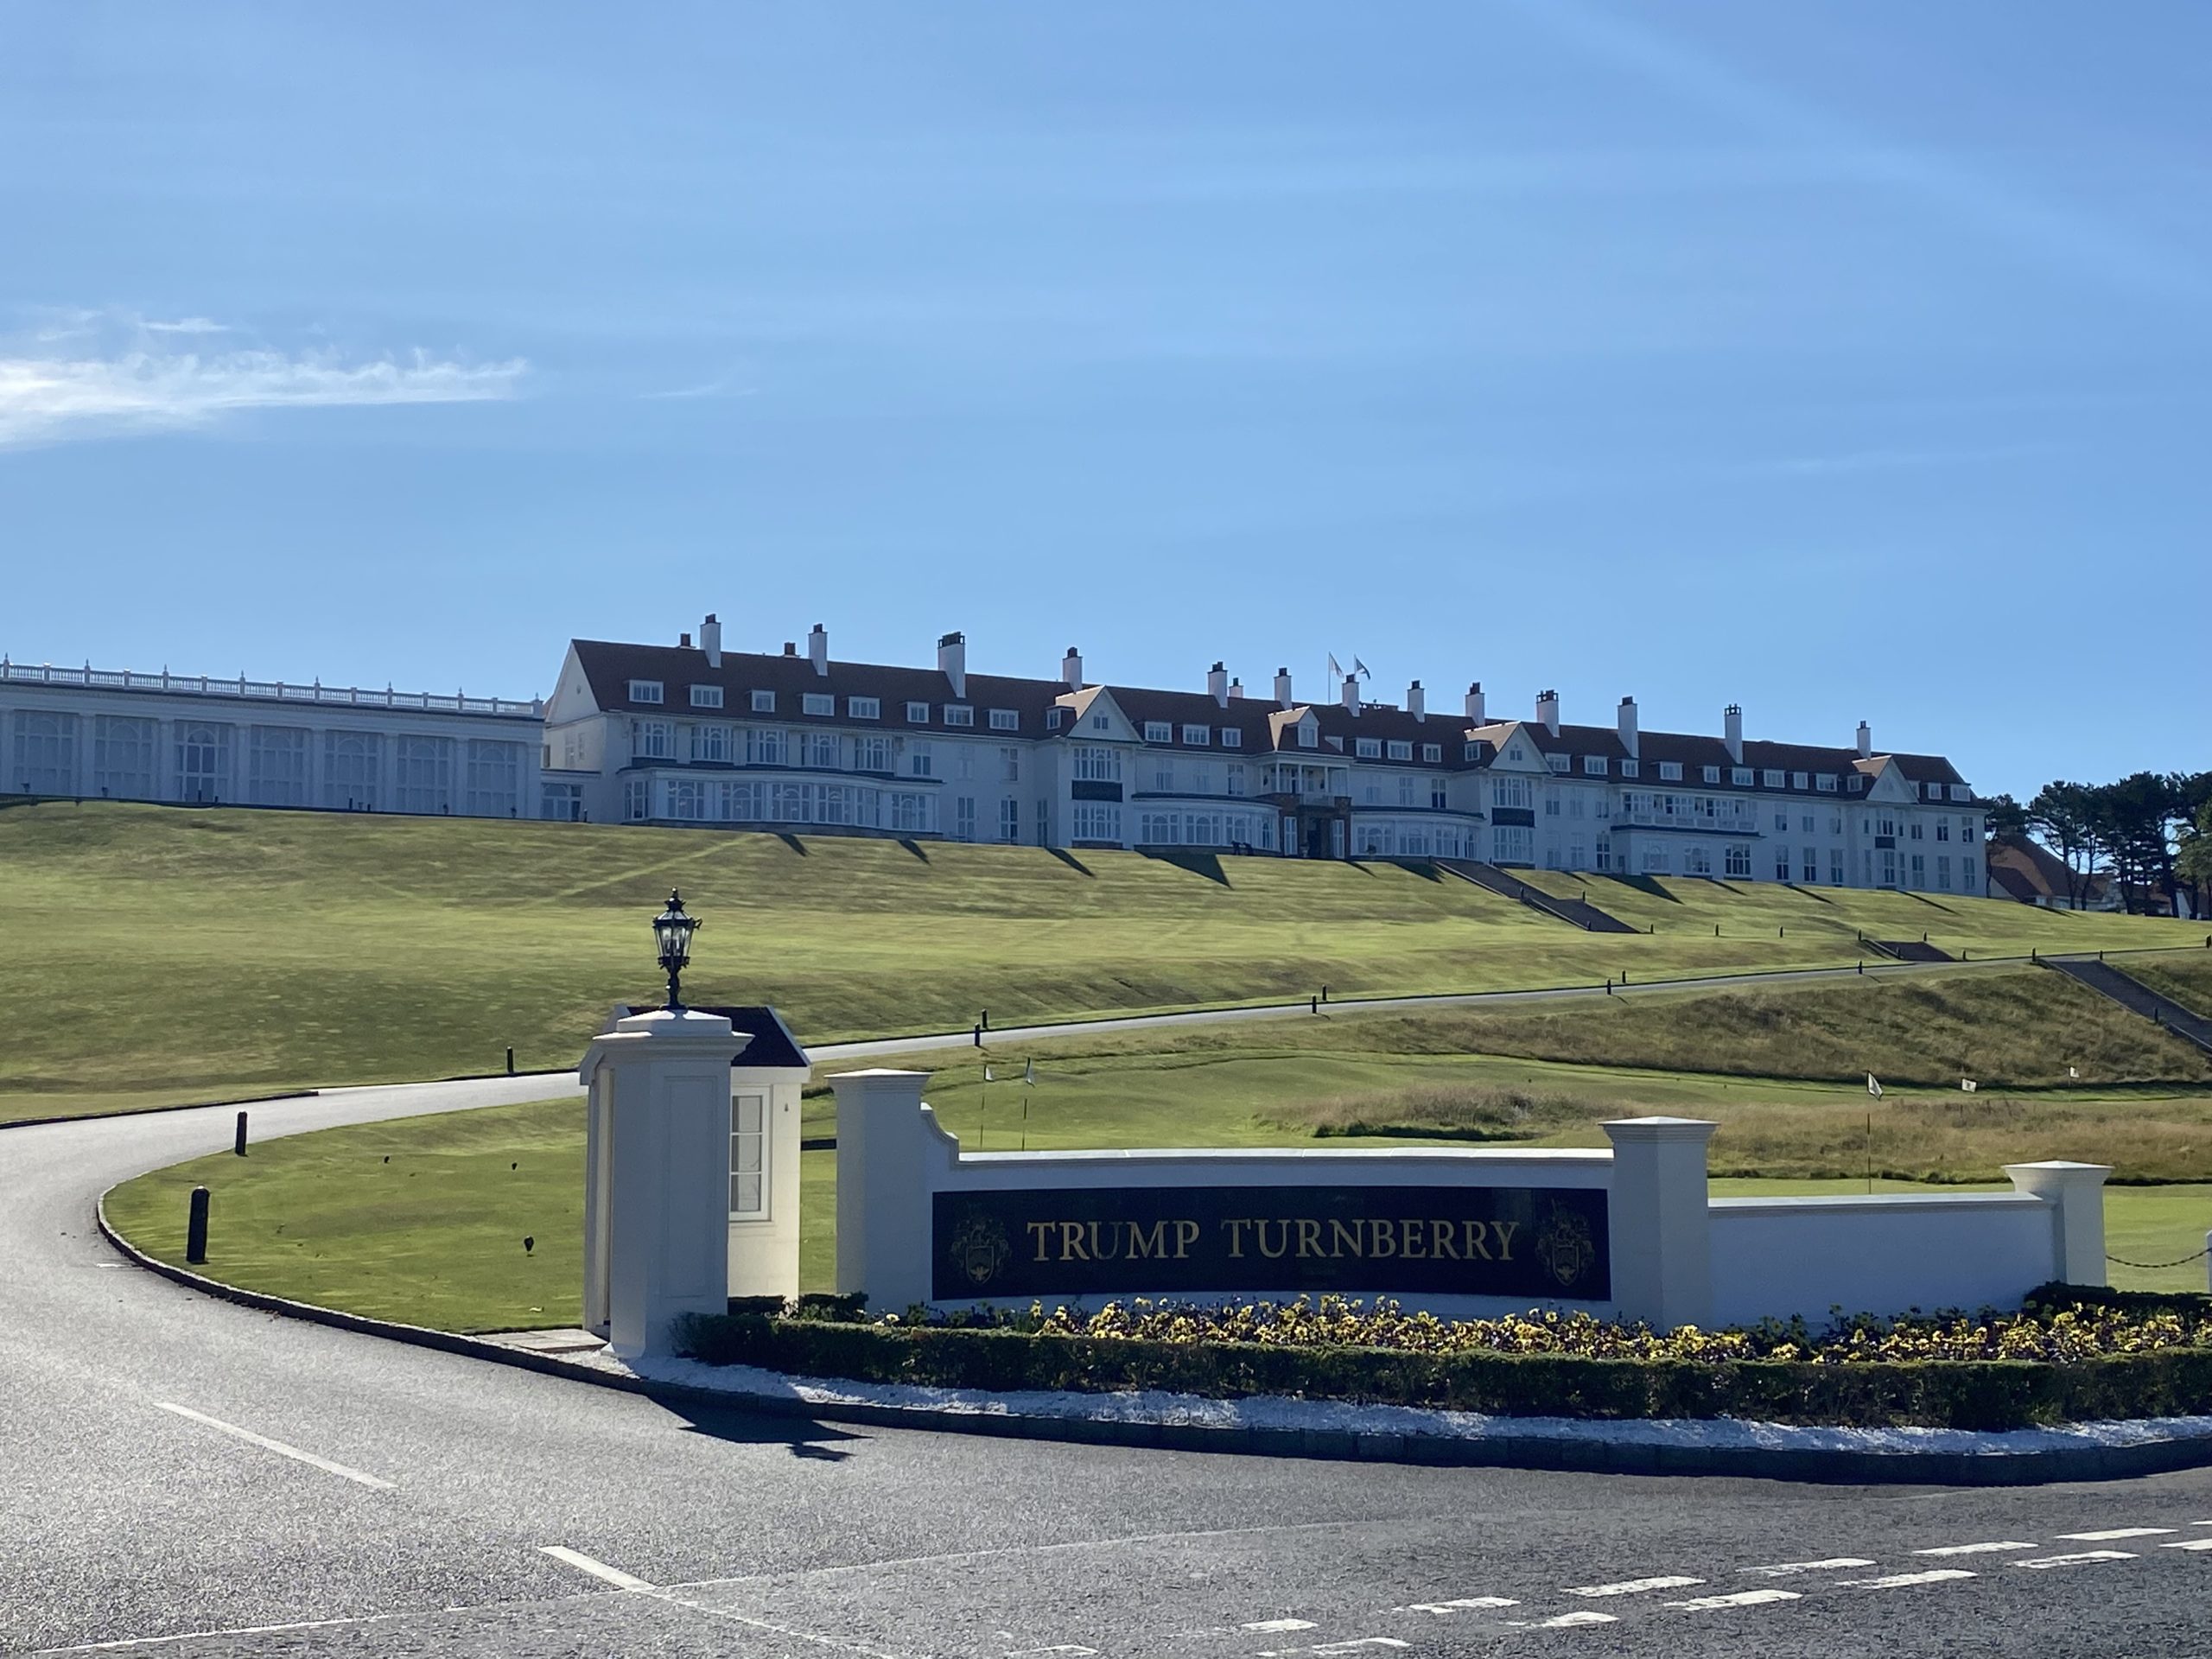 The Trump Turnberry Resort, is the revamped Ailsa Course still worthy of an Open Championship?